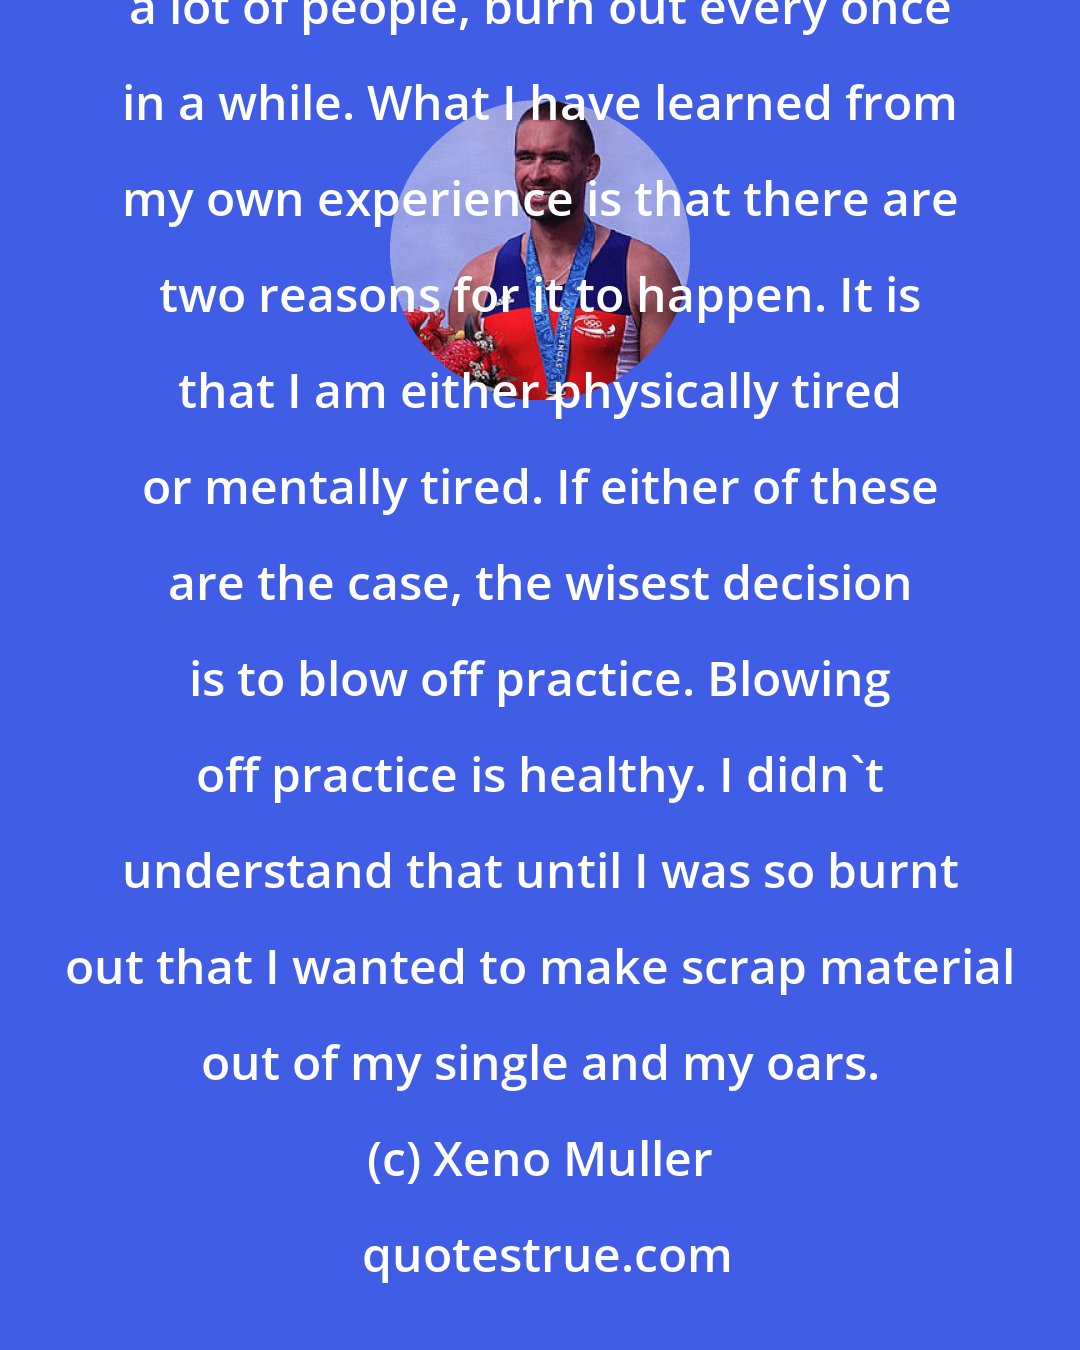 Xeno Muller: Sometimes it is really hard to sit in the single and go for a row. I think this is really normal. I, like probably a lot of people, burn out every once in a while. What I have learned from my own experience is that there are two reasons for it to happen. It is that I am either physically tired or mentally tired. If either of these are the case, the wisest decision is to blow off practice. Blowing off practice is healthy. I didn't understand that until I was so burnt out that I wanted to make scrap material out of my single and my oars.